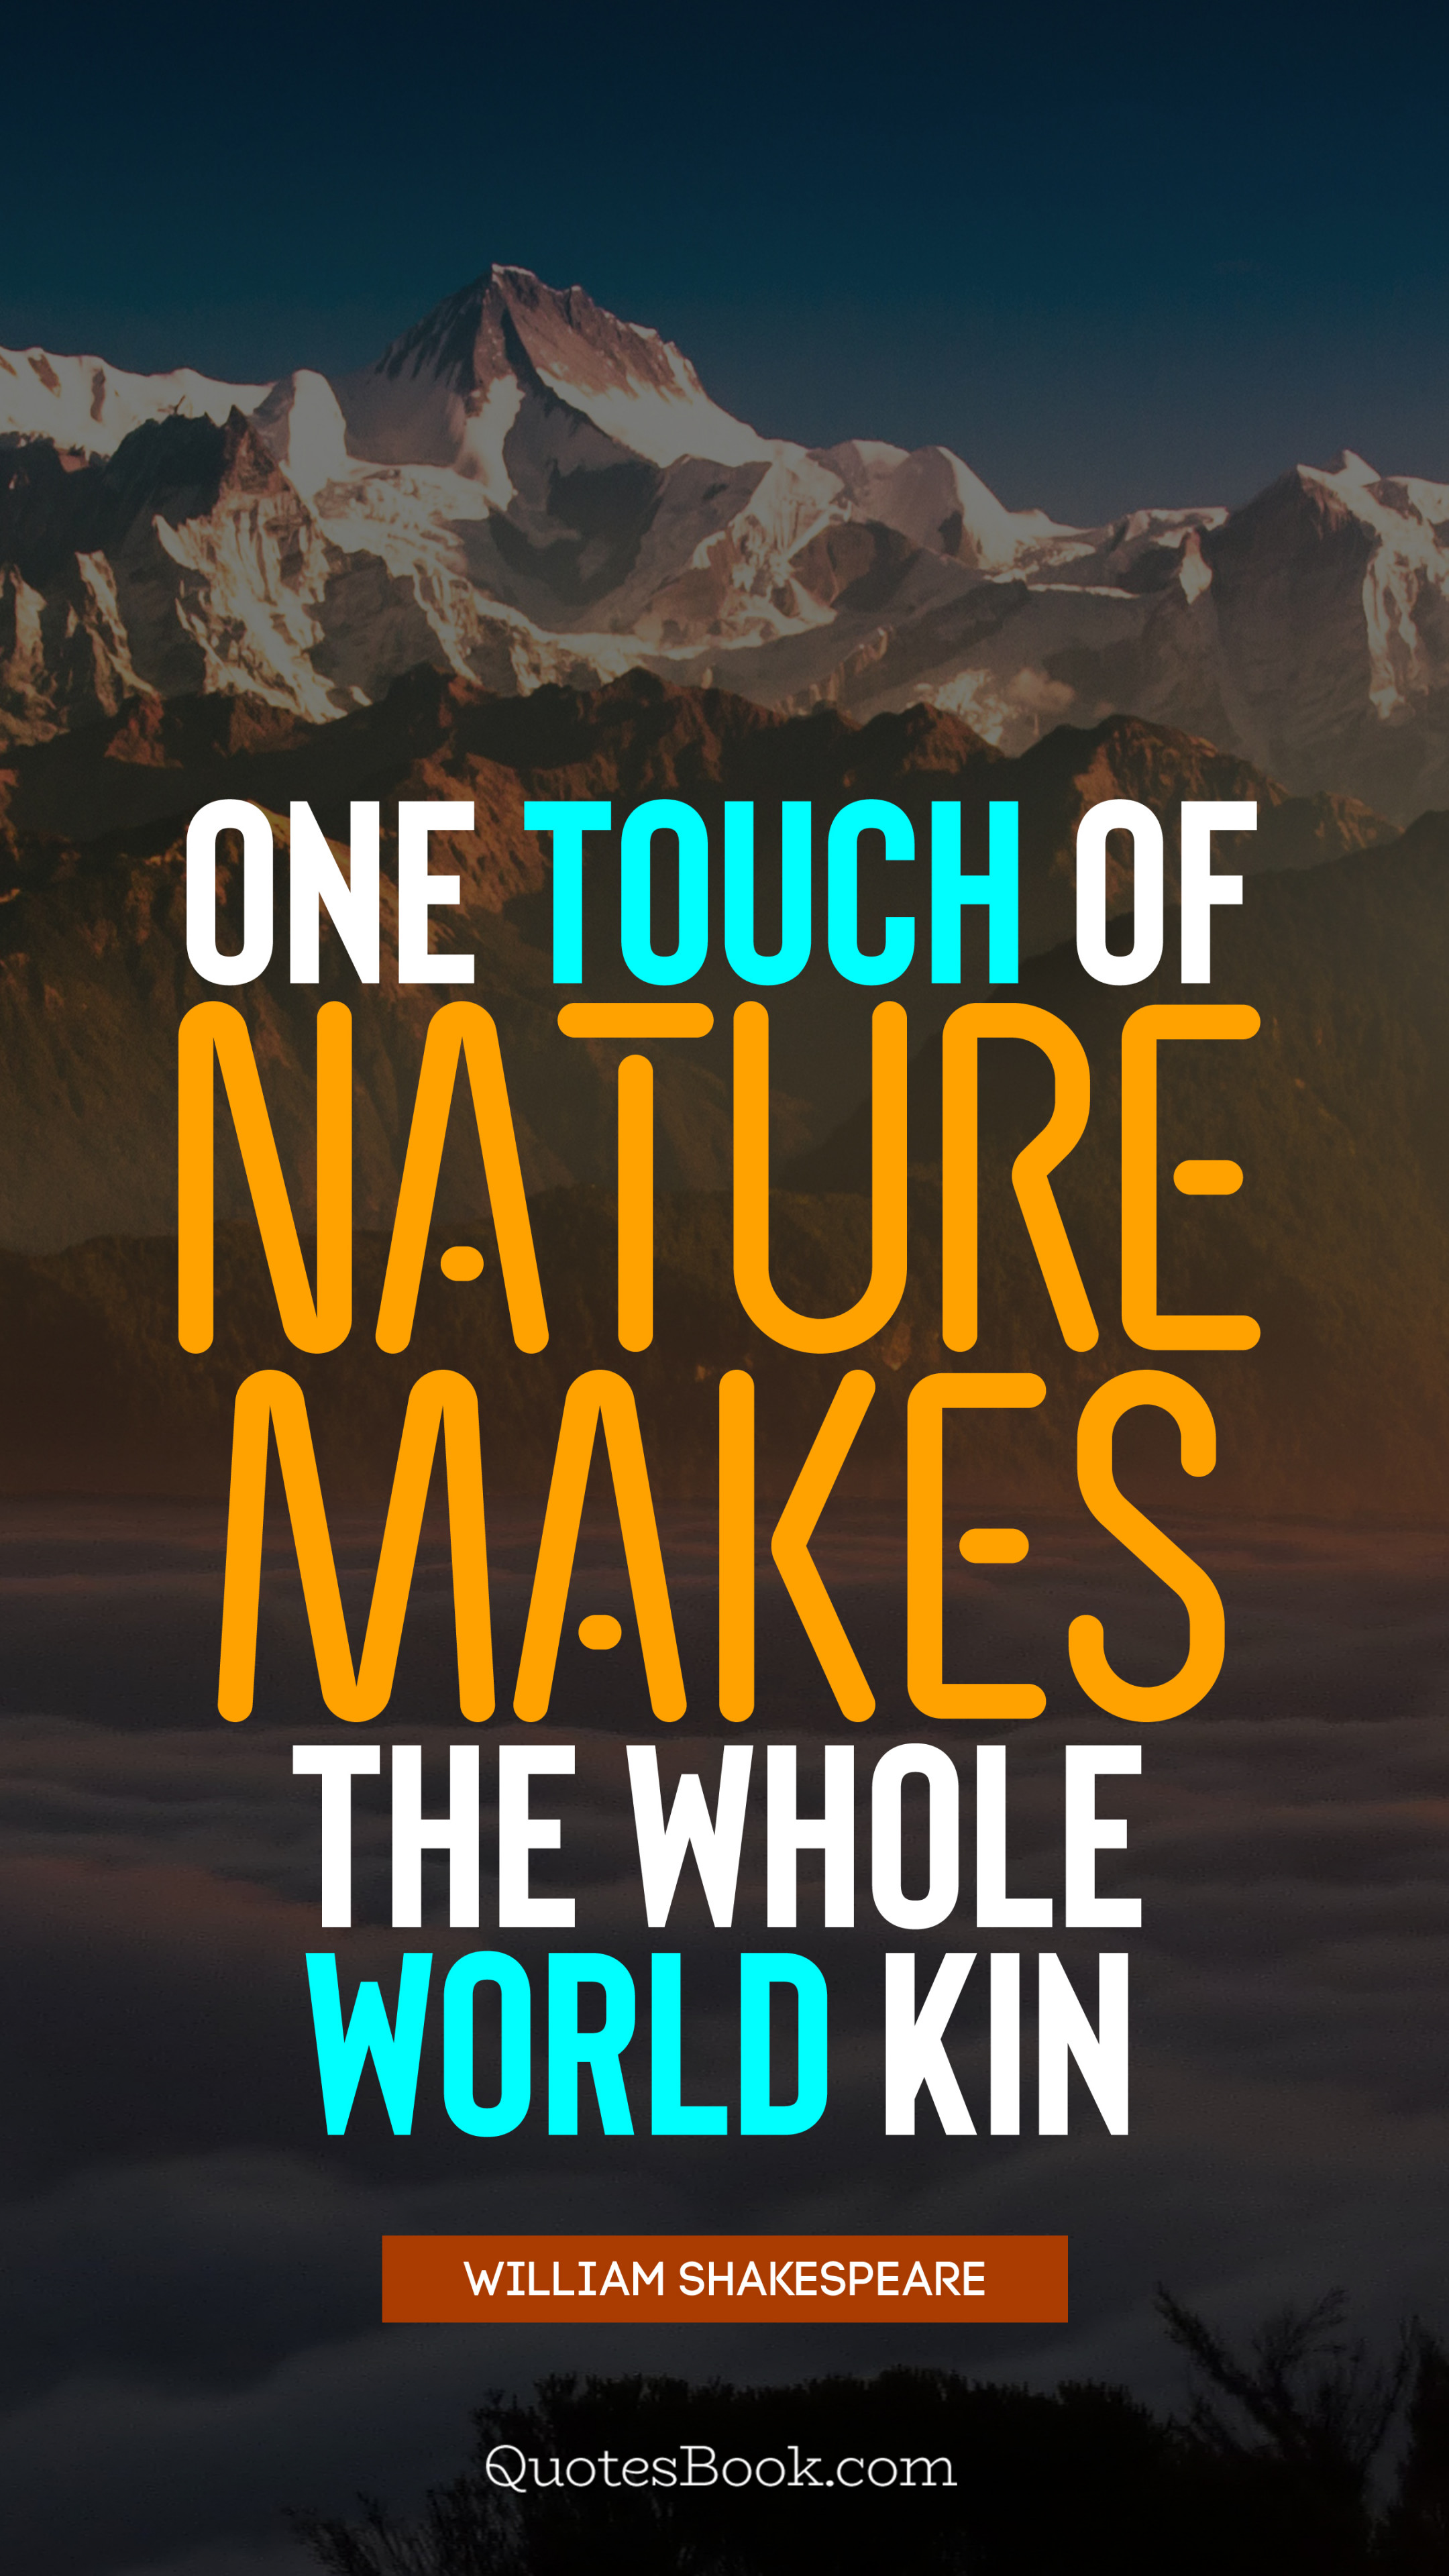 One touch nature the whole world kin. - Quote by William Shakespeare - QuotesBook